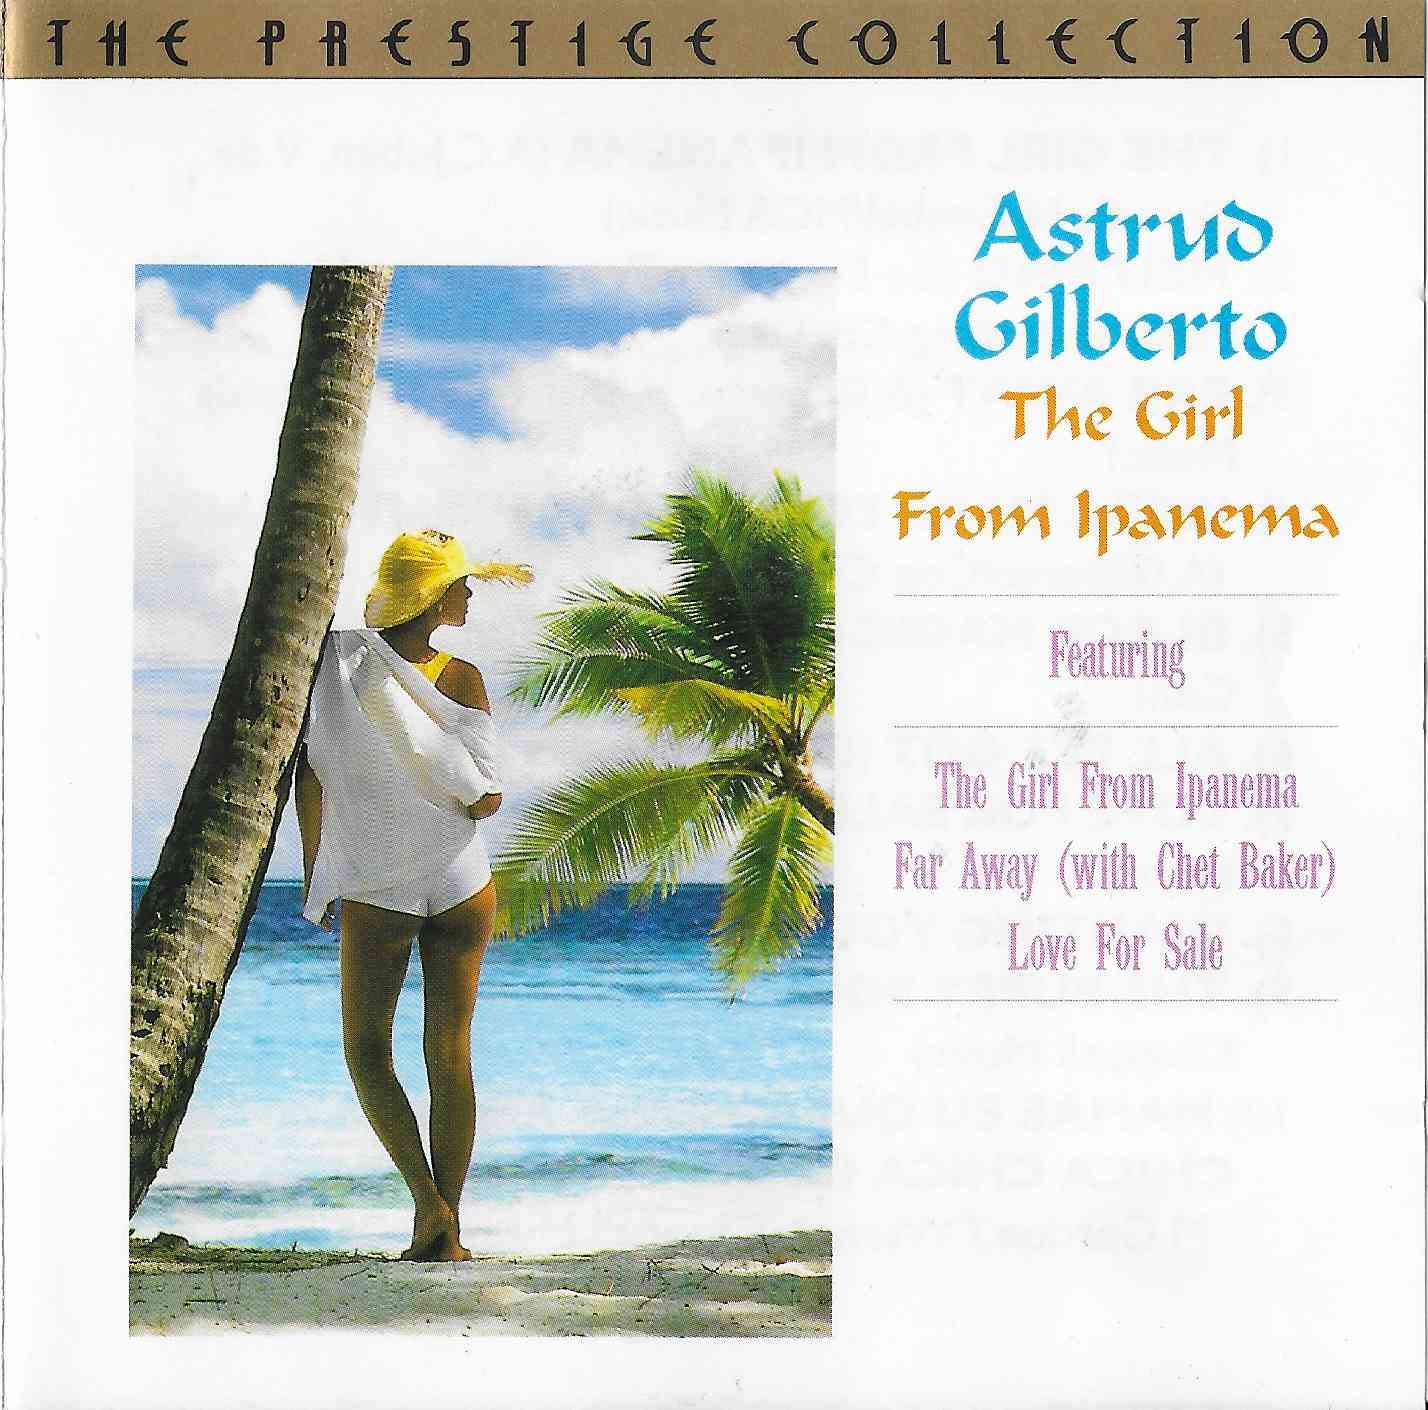 Picture of CDPC 5009 The girl from Ipanema by artist Astrud Gilberto from the BBC cds - Records and Tapes library